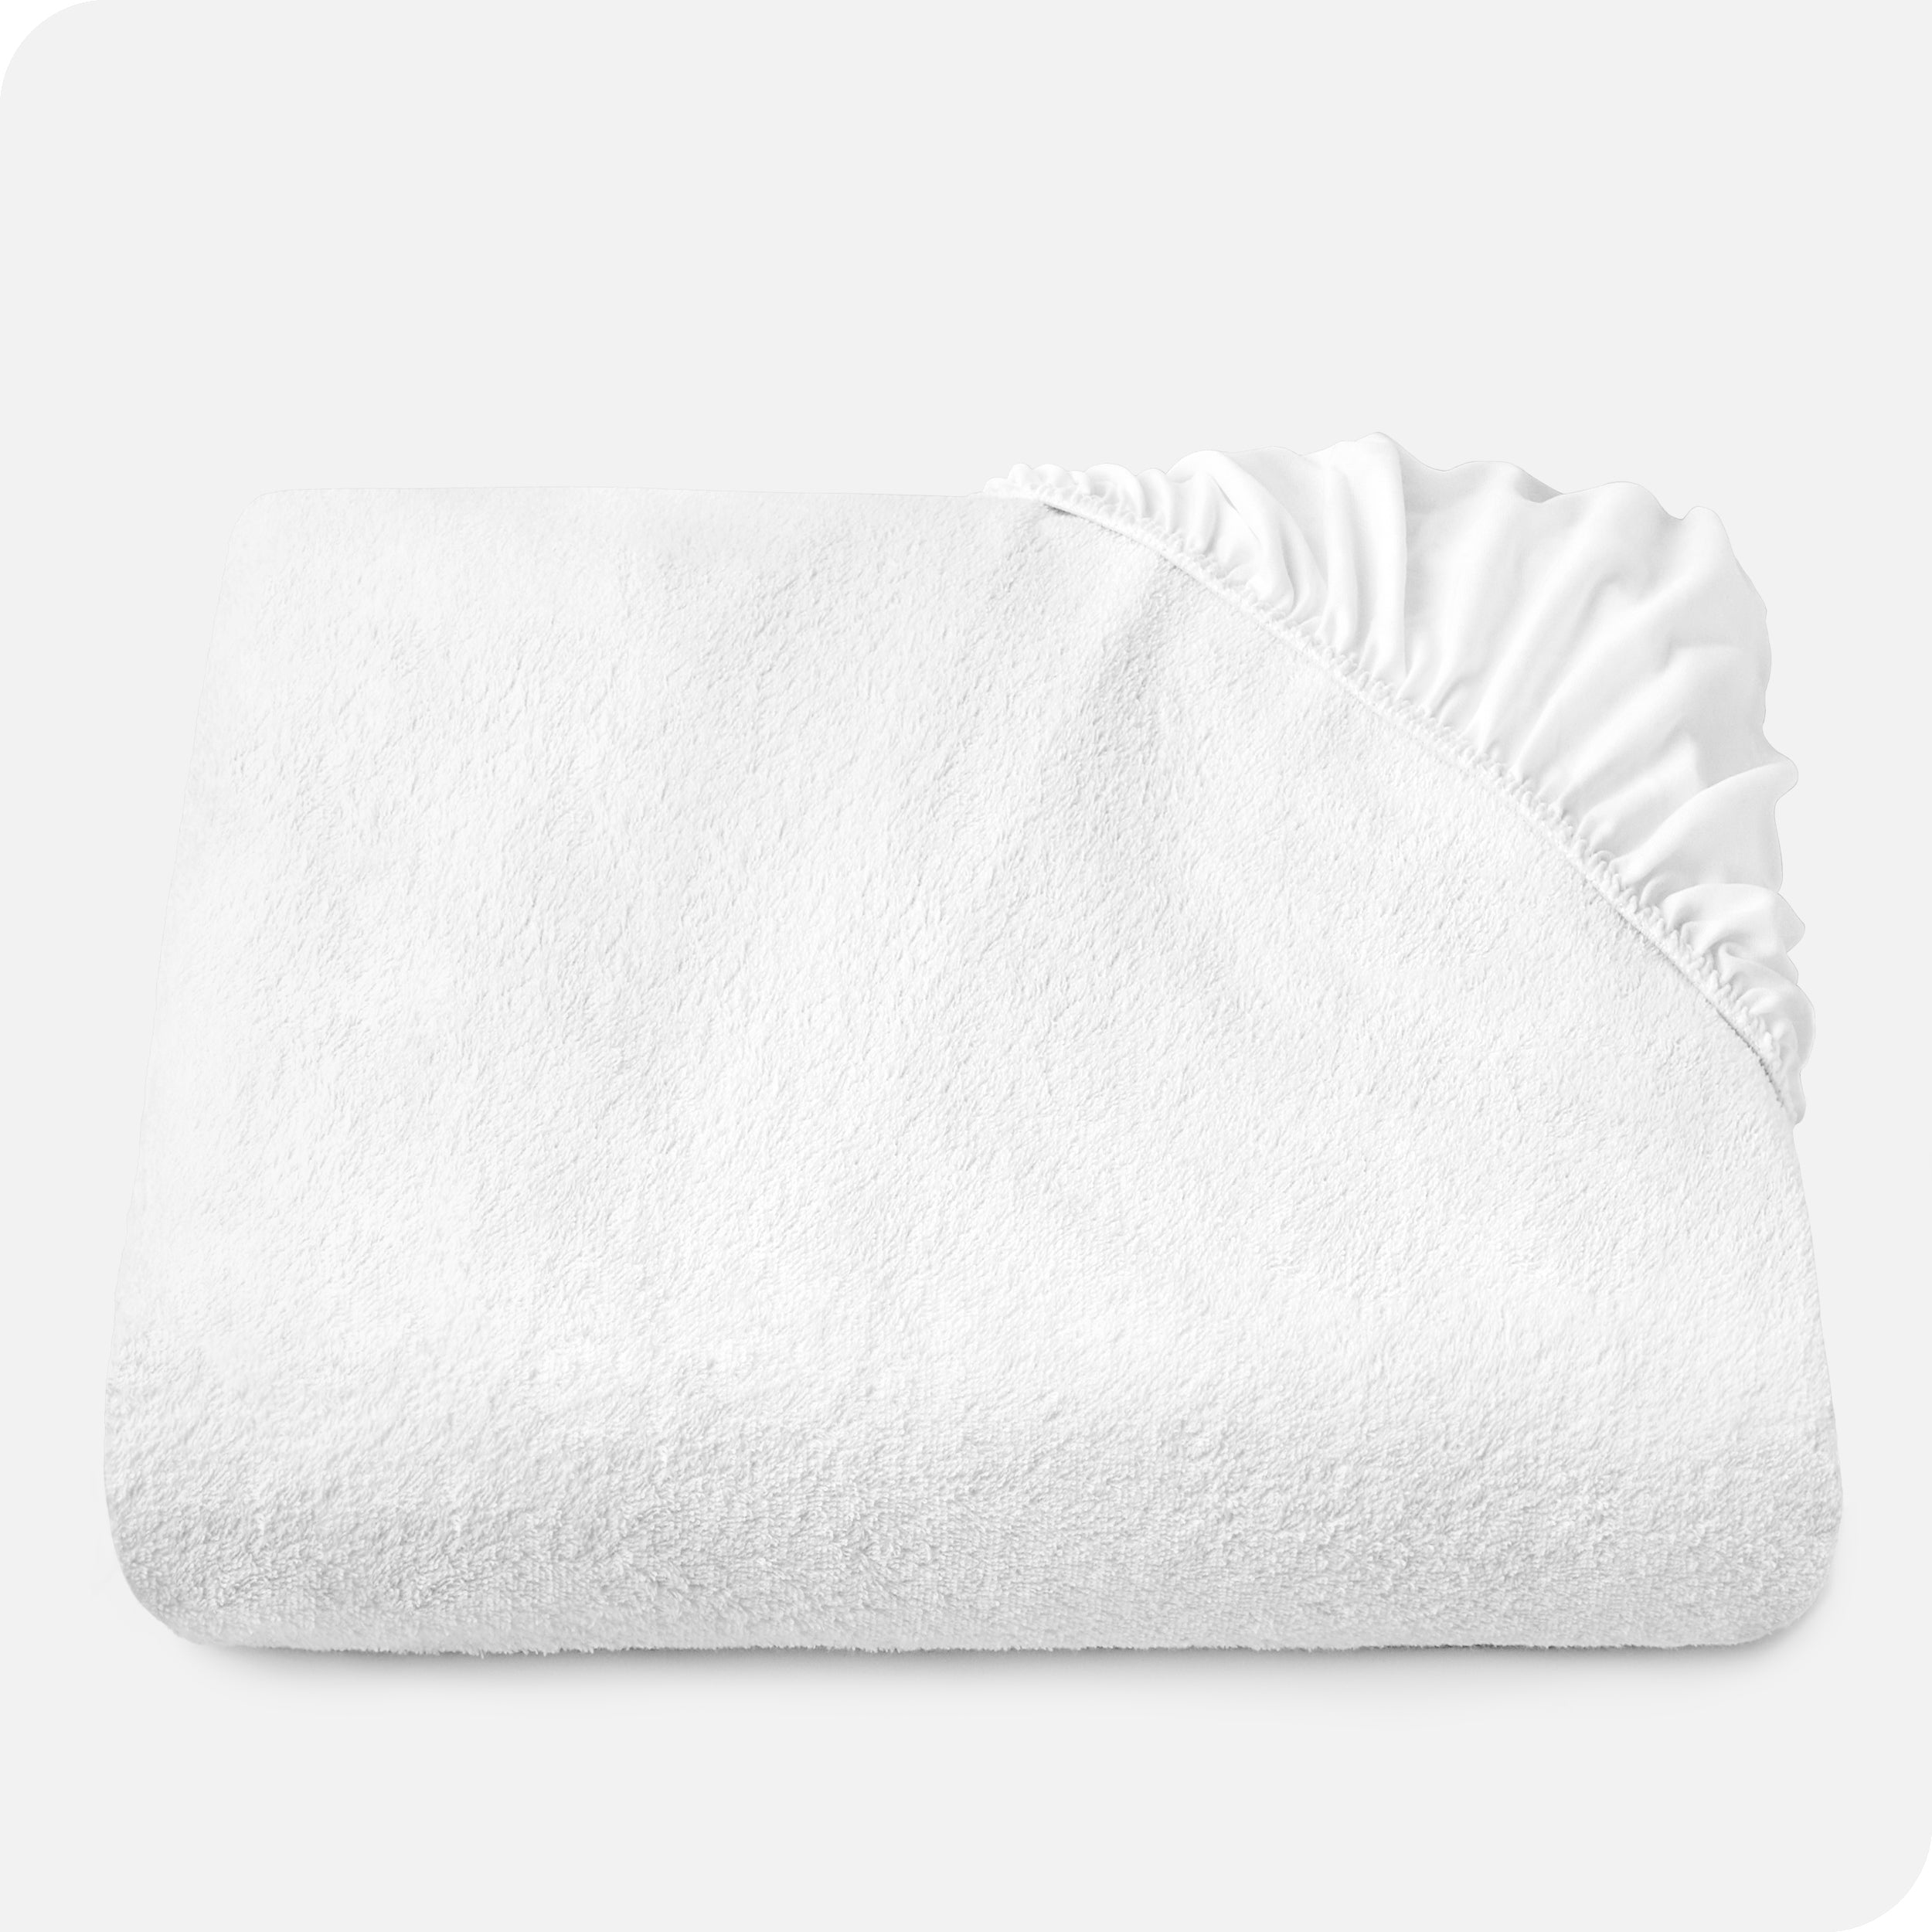 Terry mattress protector folded neatly with the elastic from a corner folded over the top